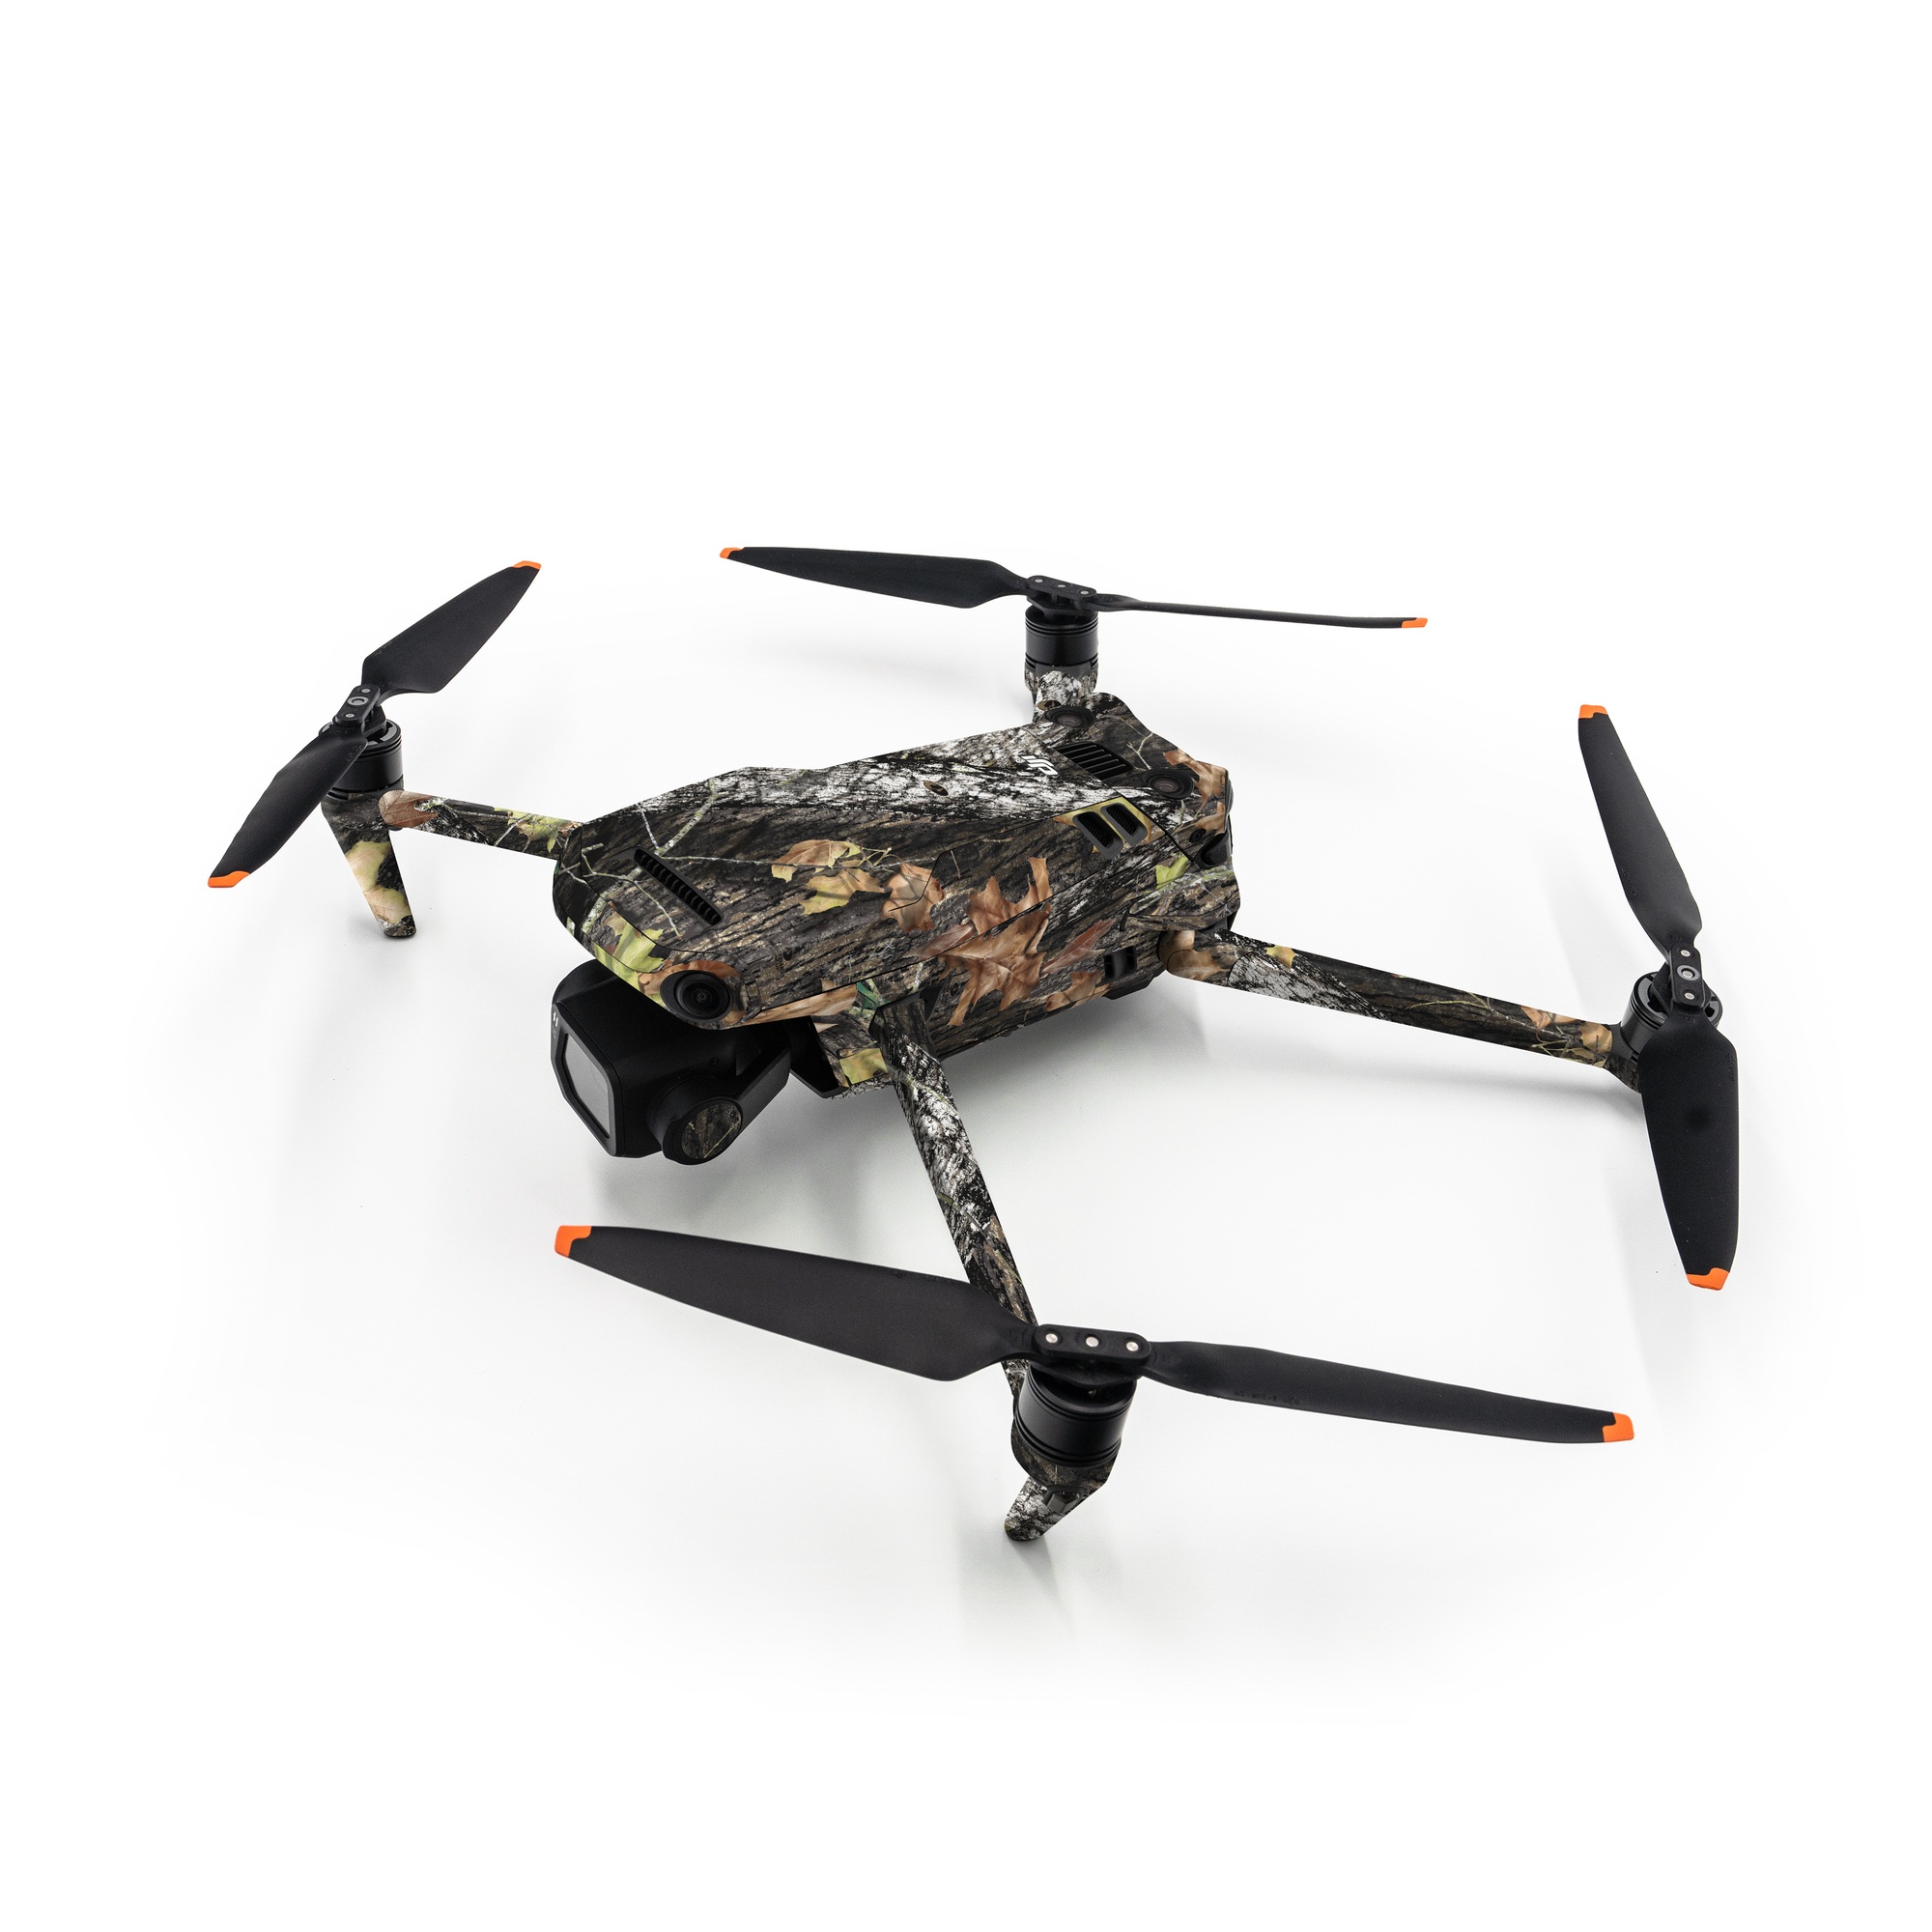 DJI Mavic 3 Skin design of Leaf, Tree, Plant, Adaptation, Camouflage, Branch, Wildlife, Trunk, Root, with black, gray, green, red colors